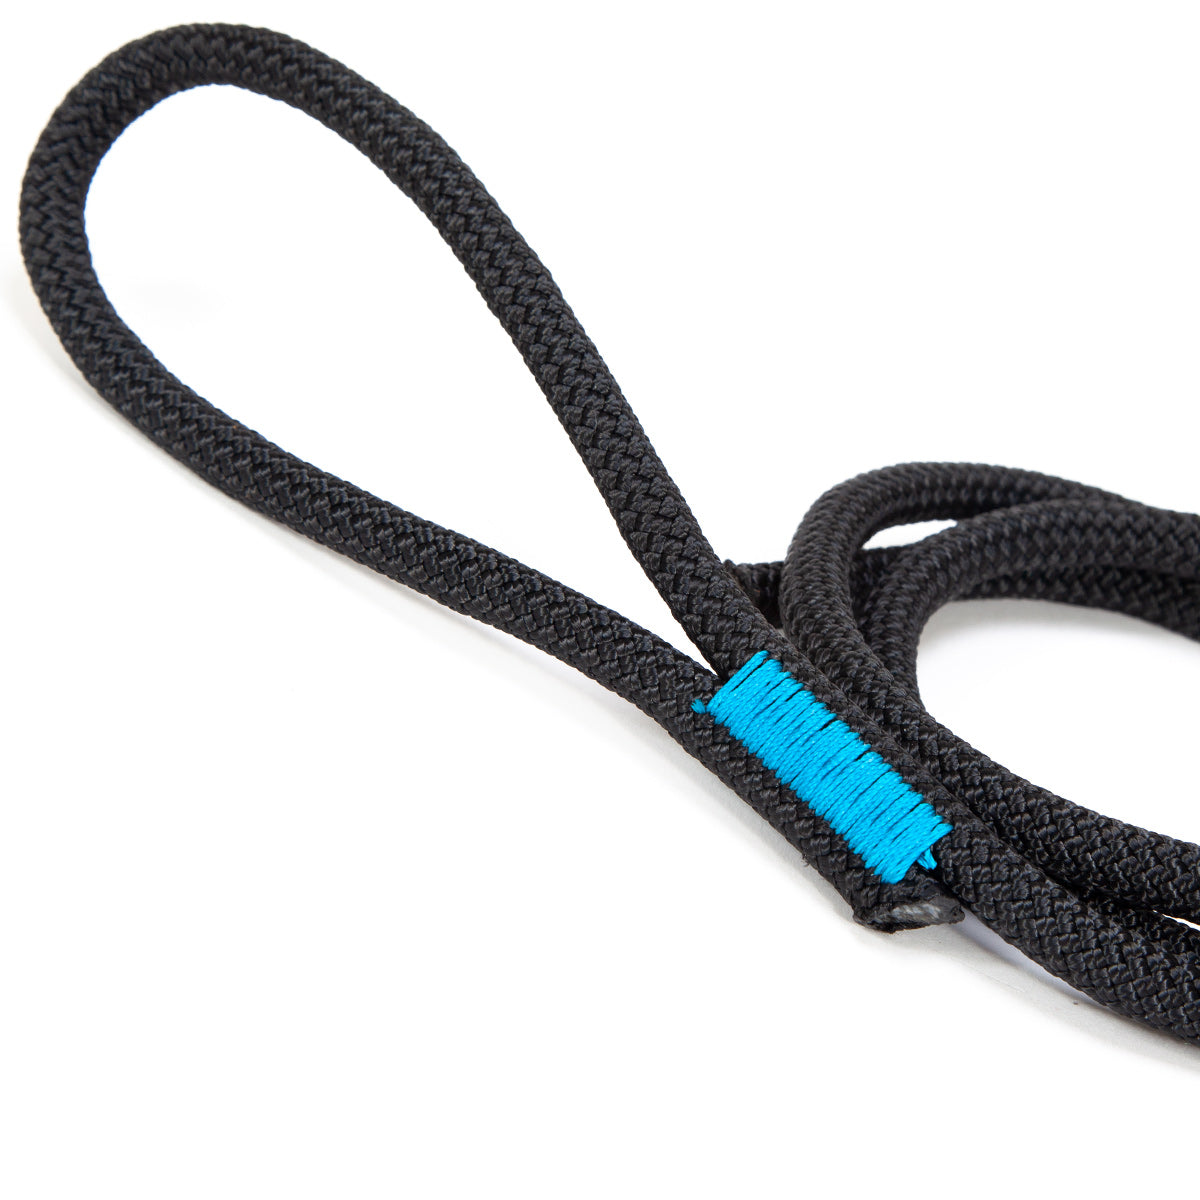 What are the basic tools needed for splicing rope? - Sailing Chandlery